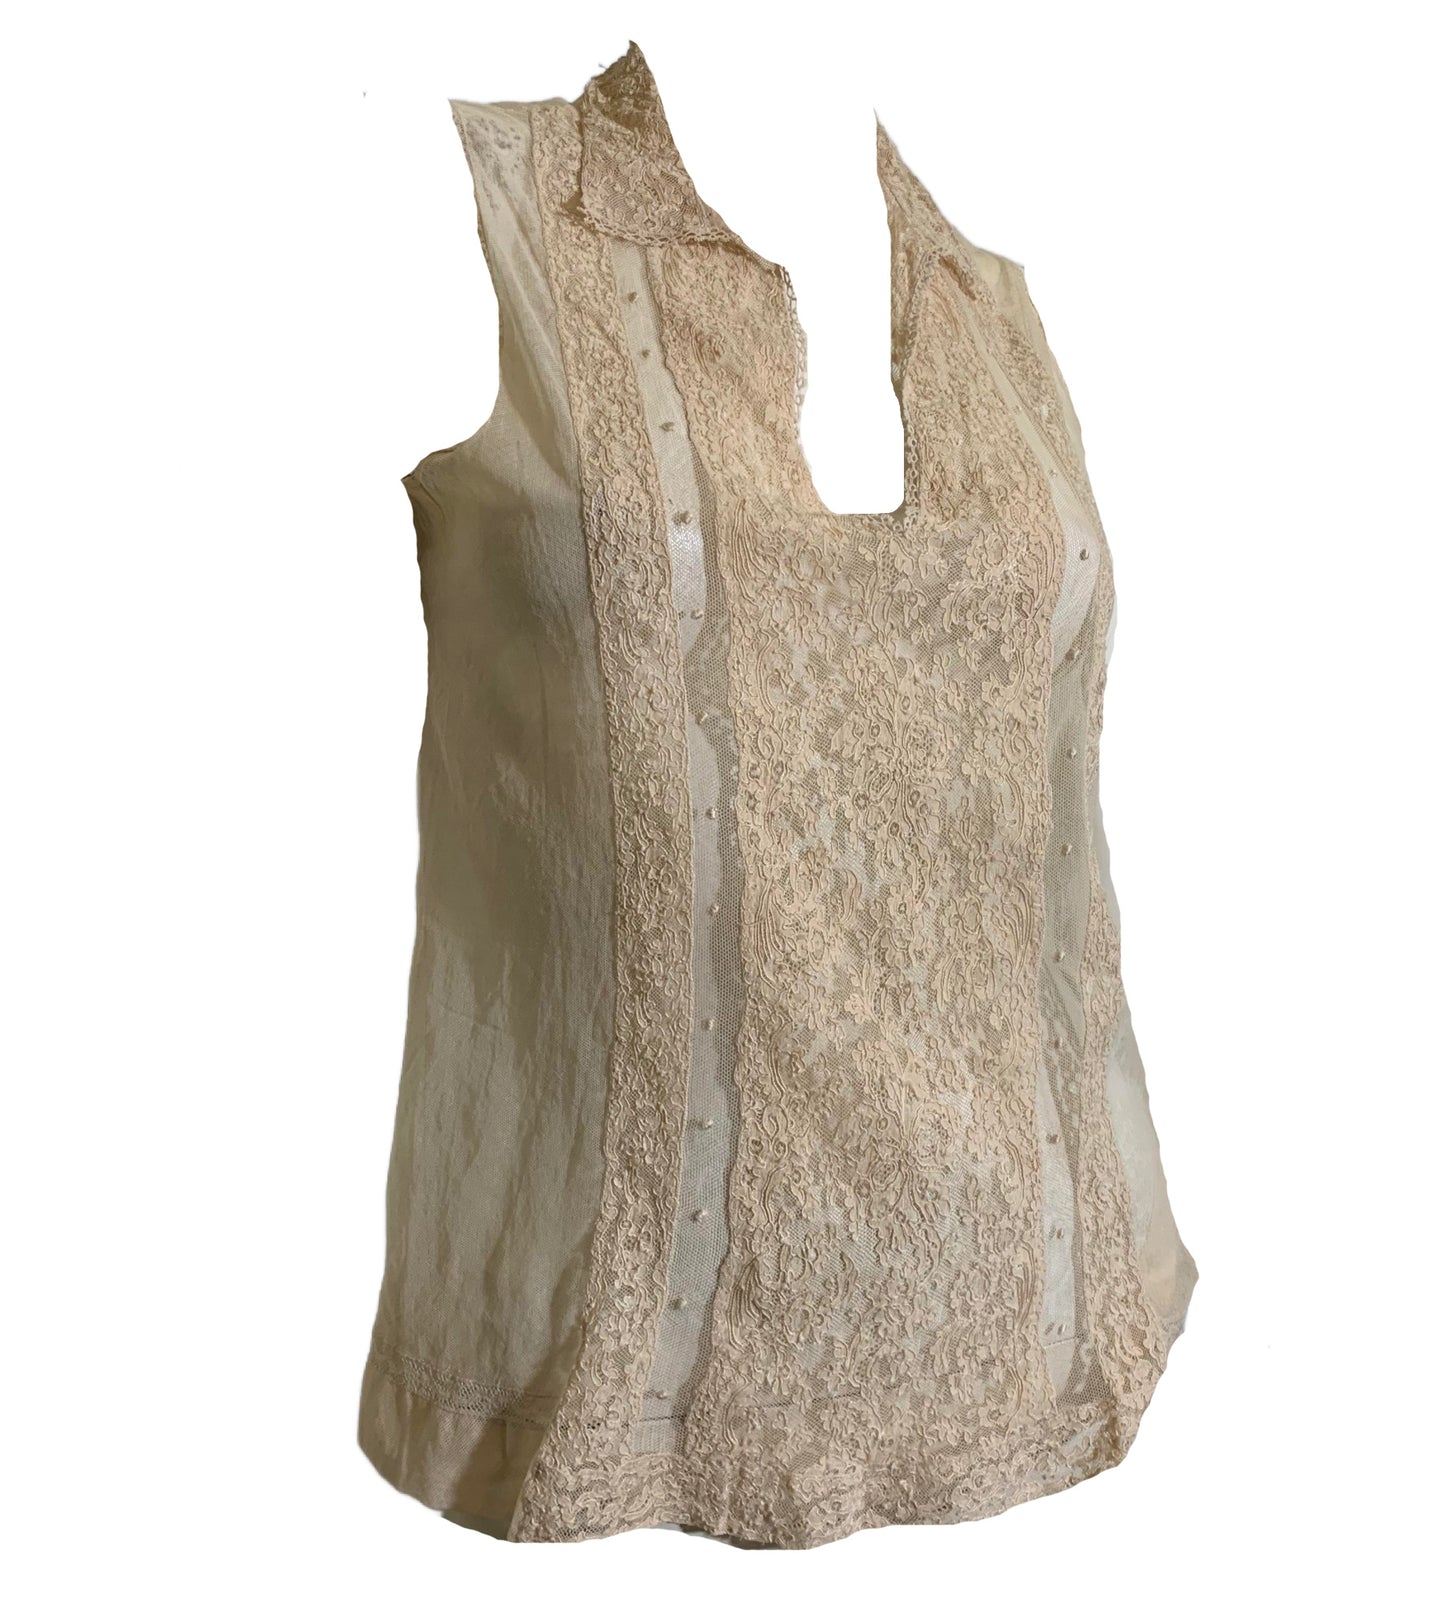 Sheer Ivory Mesh Lace Trimmed Layering Tunic Blouse circa 1920s